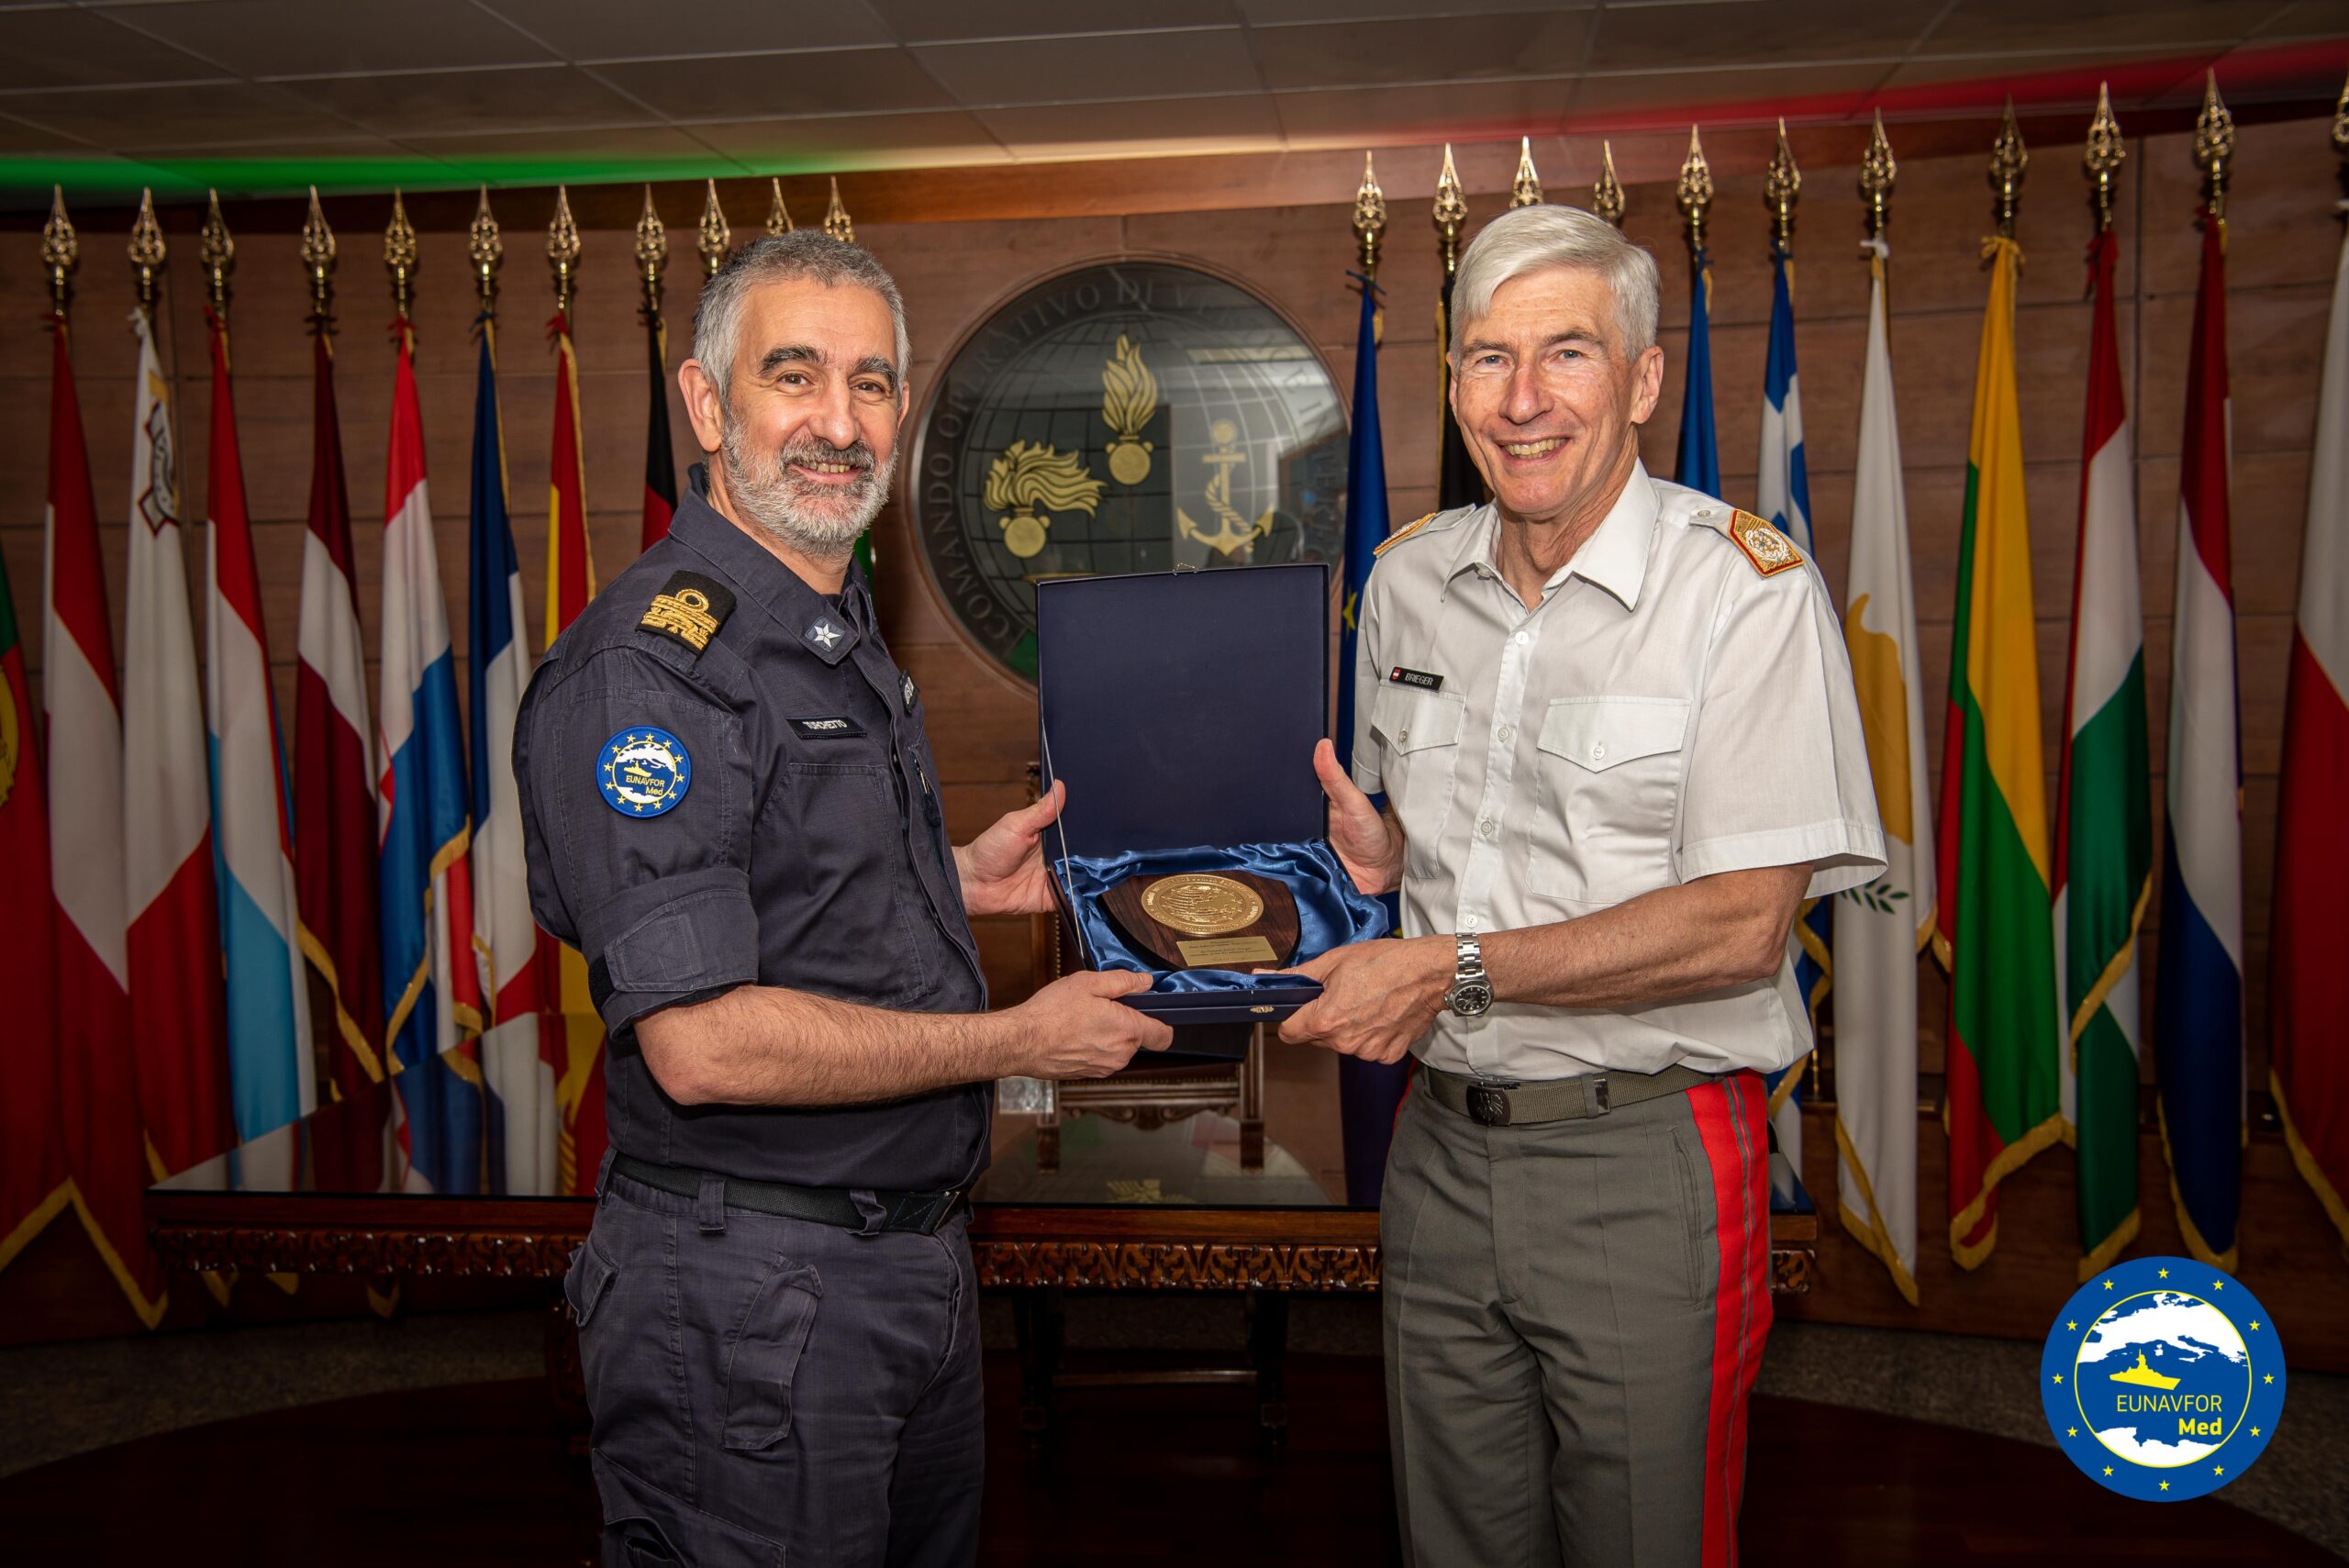 General Robert Brieger, Chairman of the EU Military Committee, visited EUNAVFOR MED IRINI OHQ